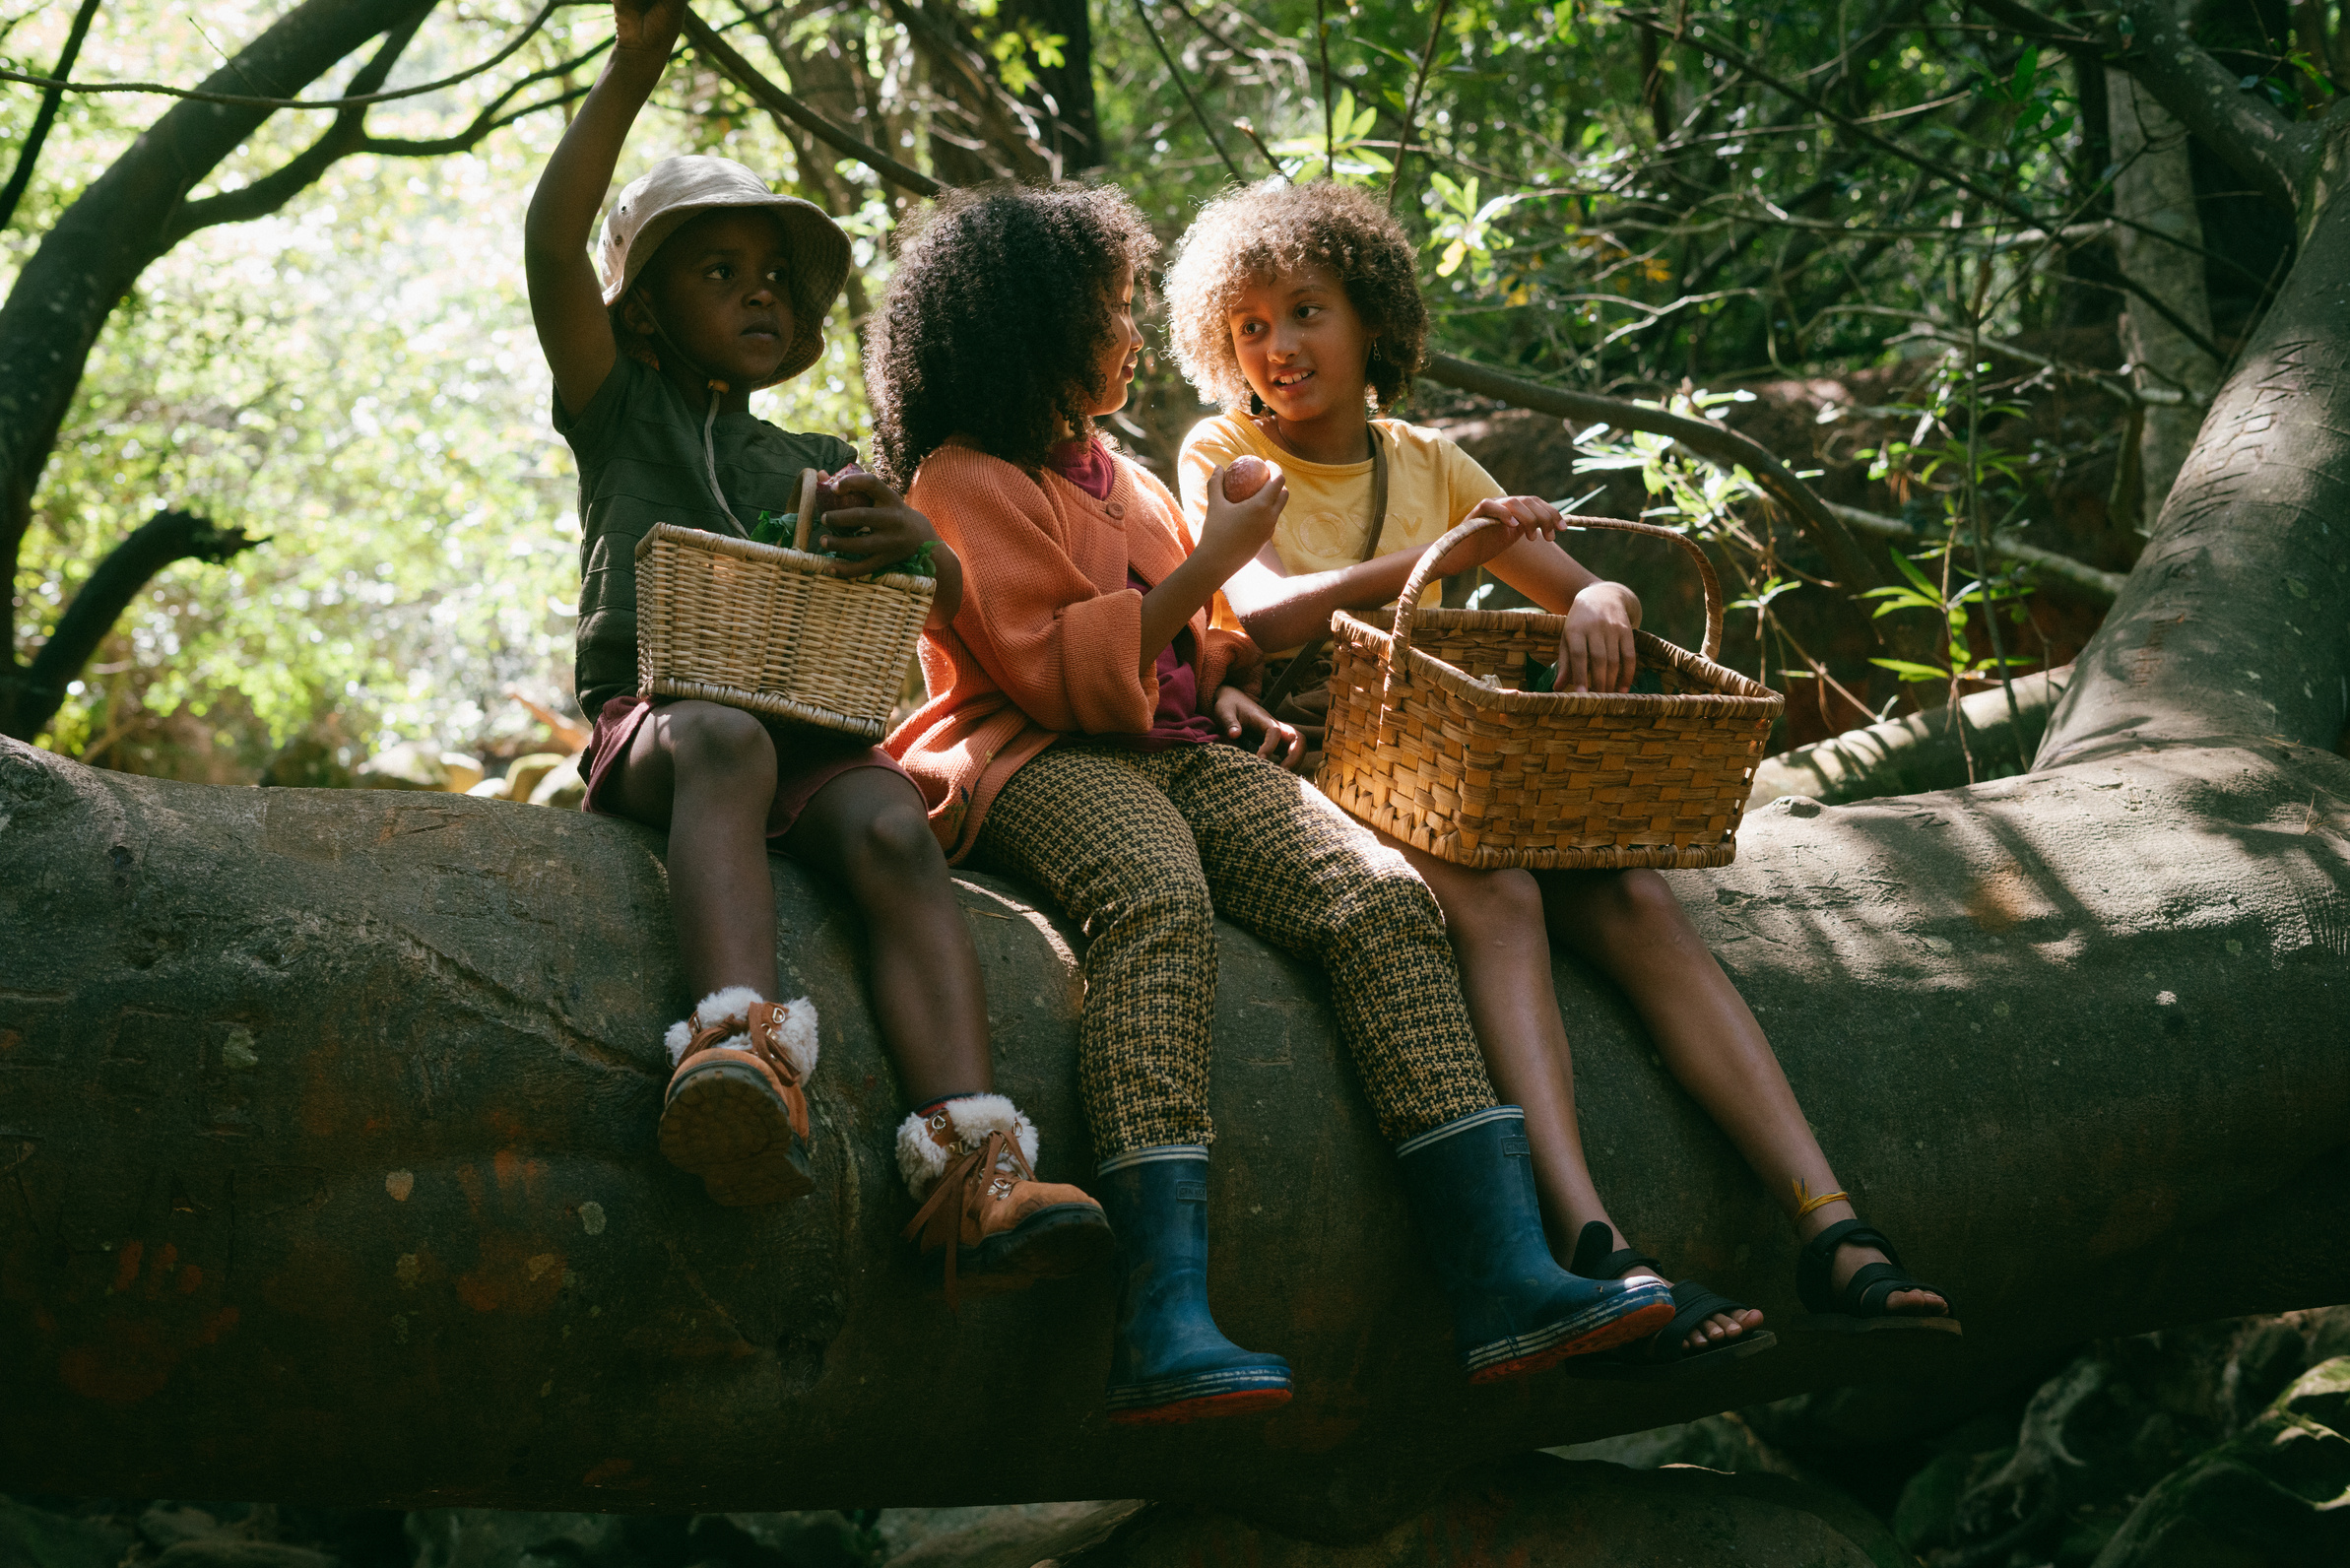 Kids with Wicker Baskets Foraging in the Forest